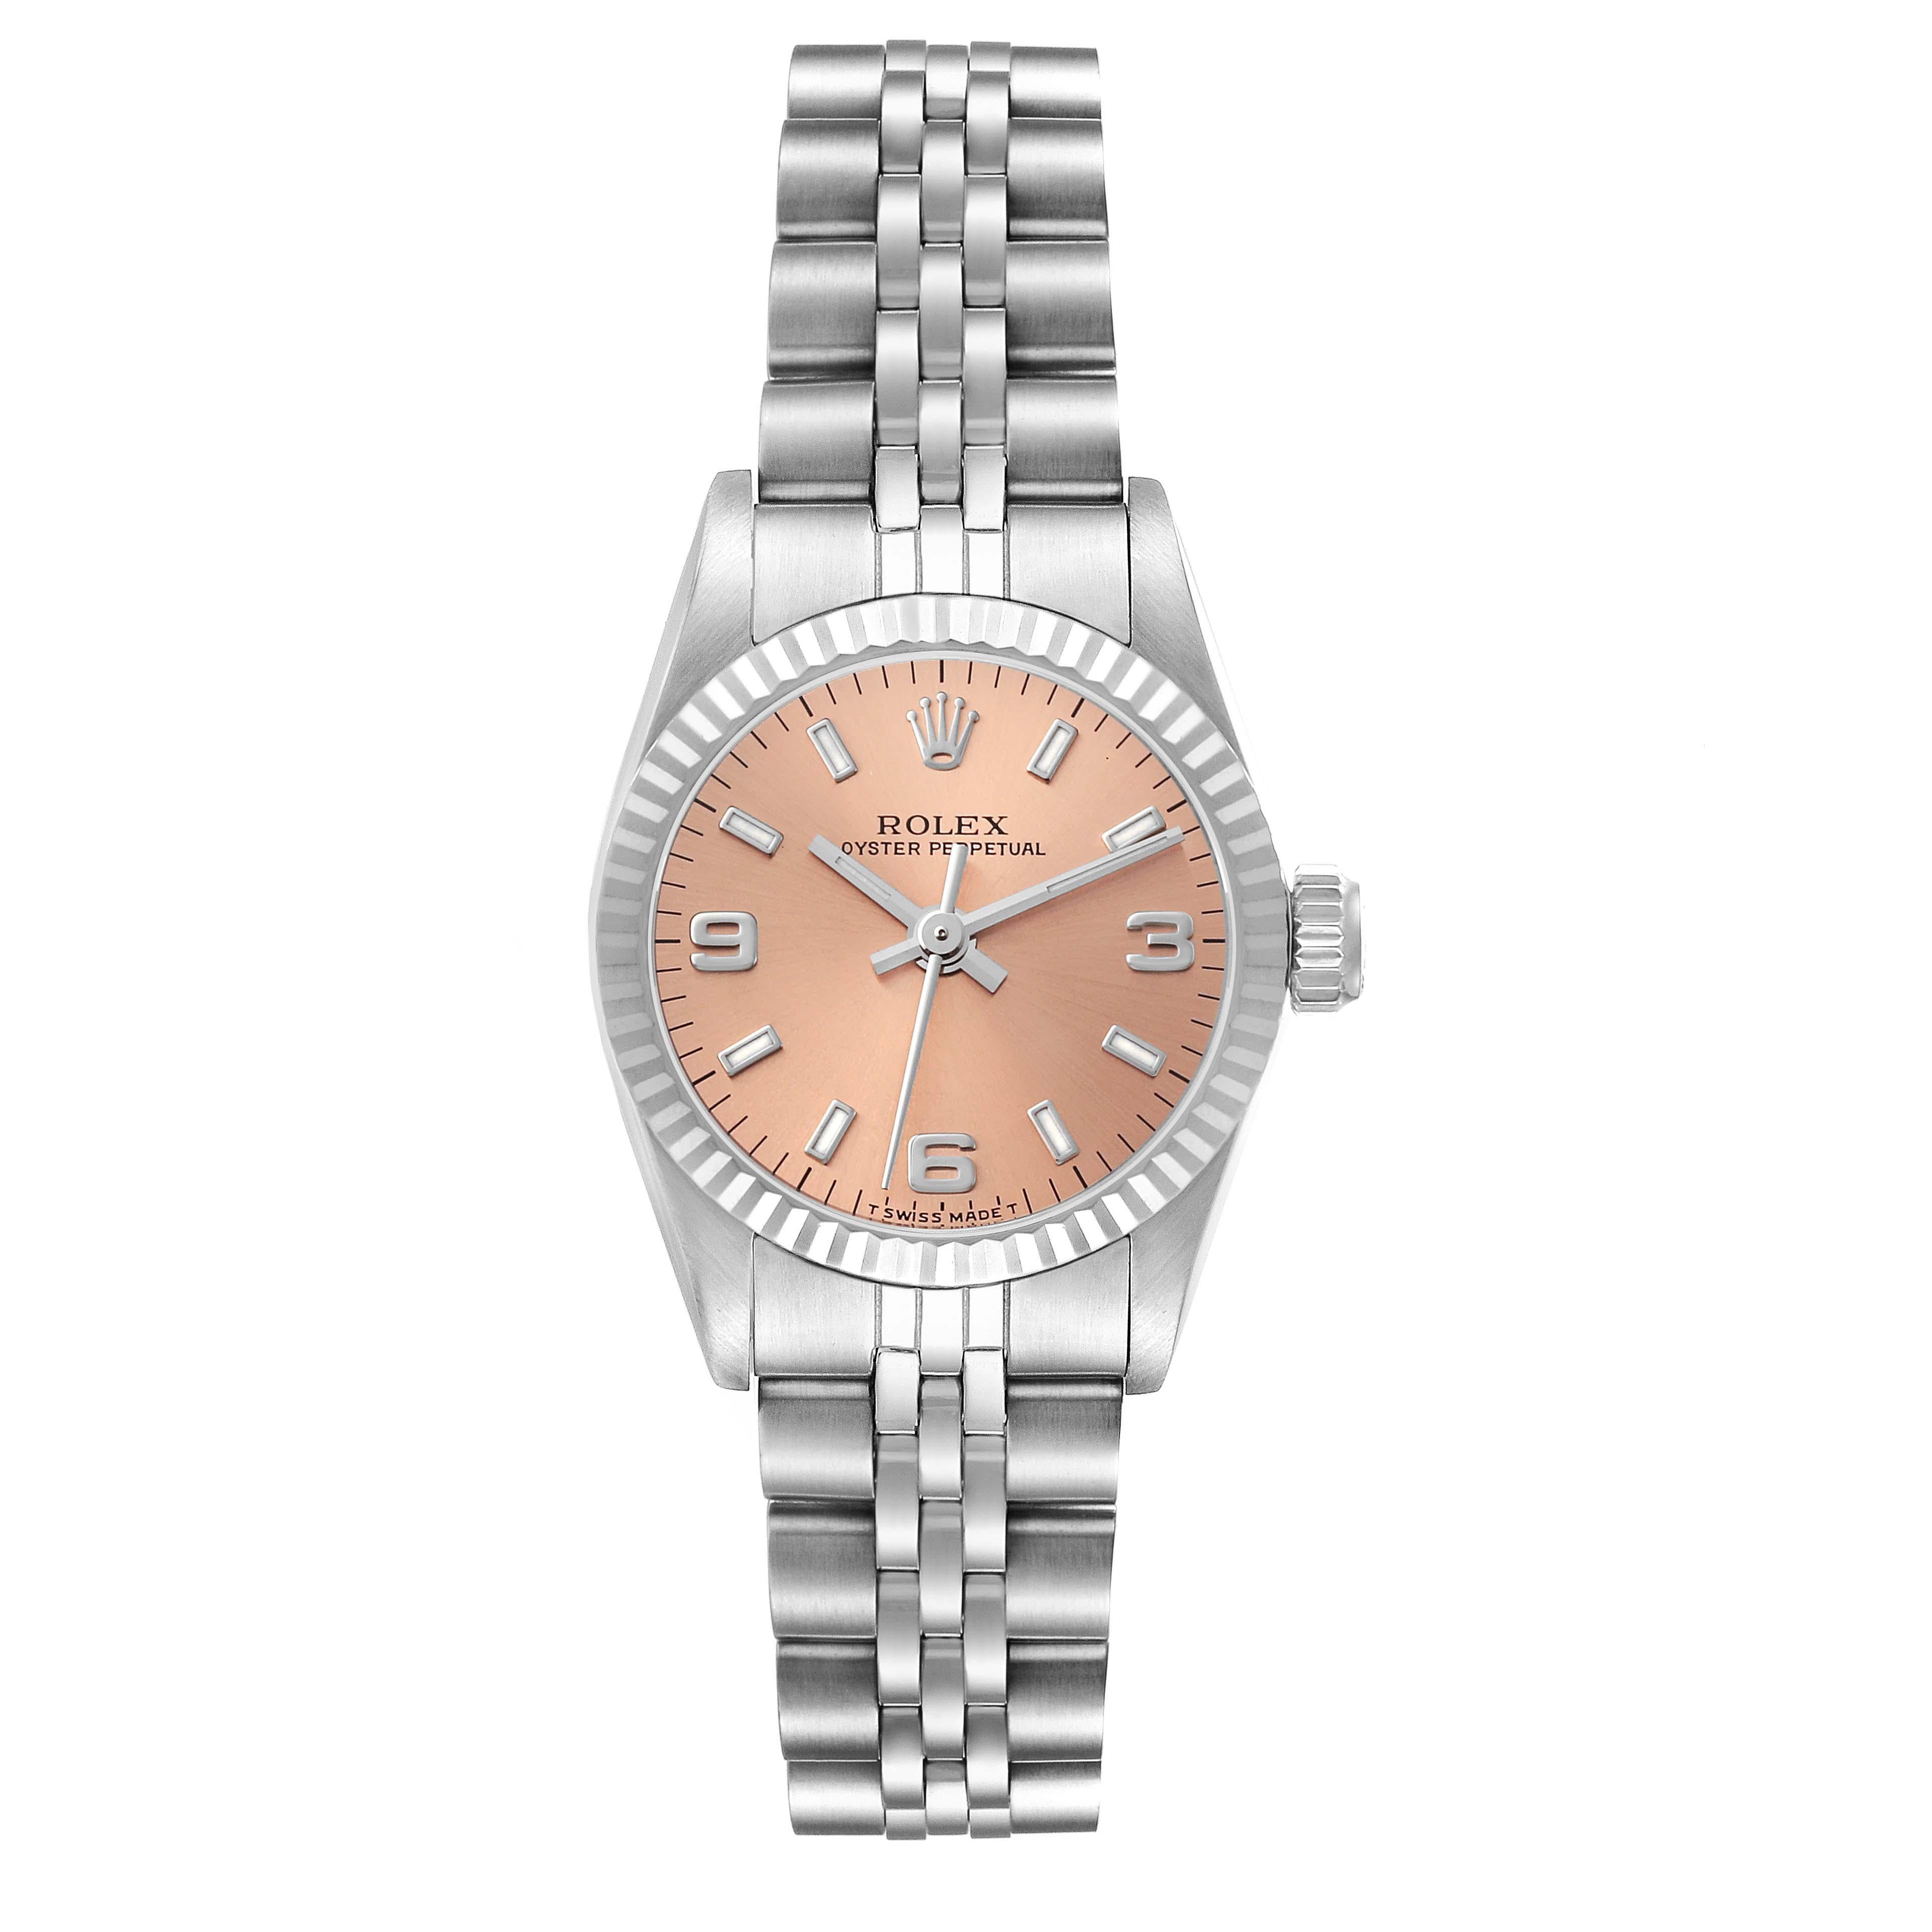 Rolex Oyster Perpetual Salmon Steel White Gold Ladies Watch 67194 Box Papers. Officially certified chronometer automatic self-winding movement. Stainless steel oyster case 24.0 mm in diameter. Rolex logo on the crown. 18k white gold fluted bezel.